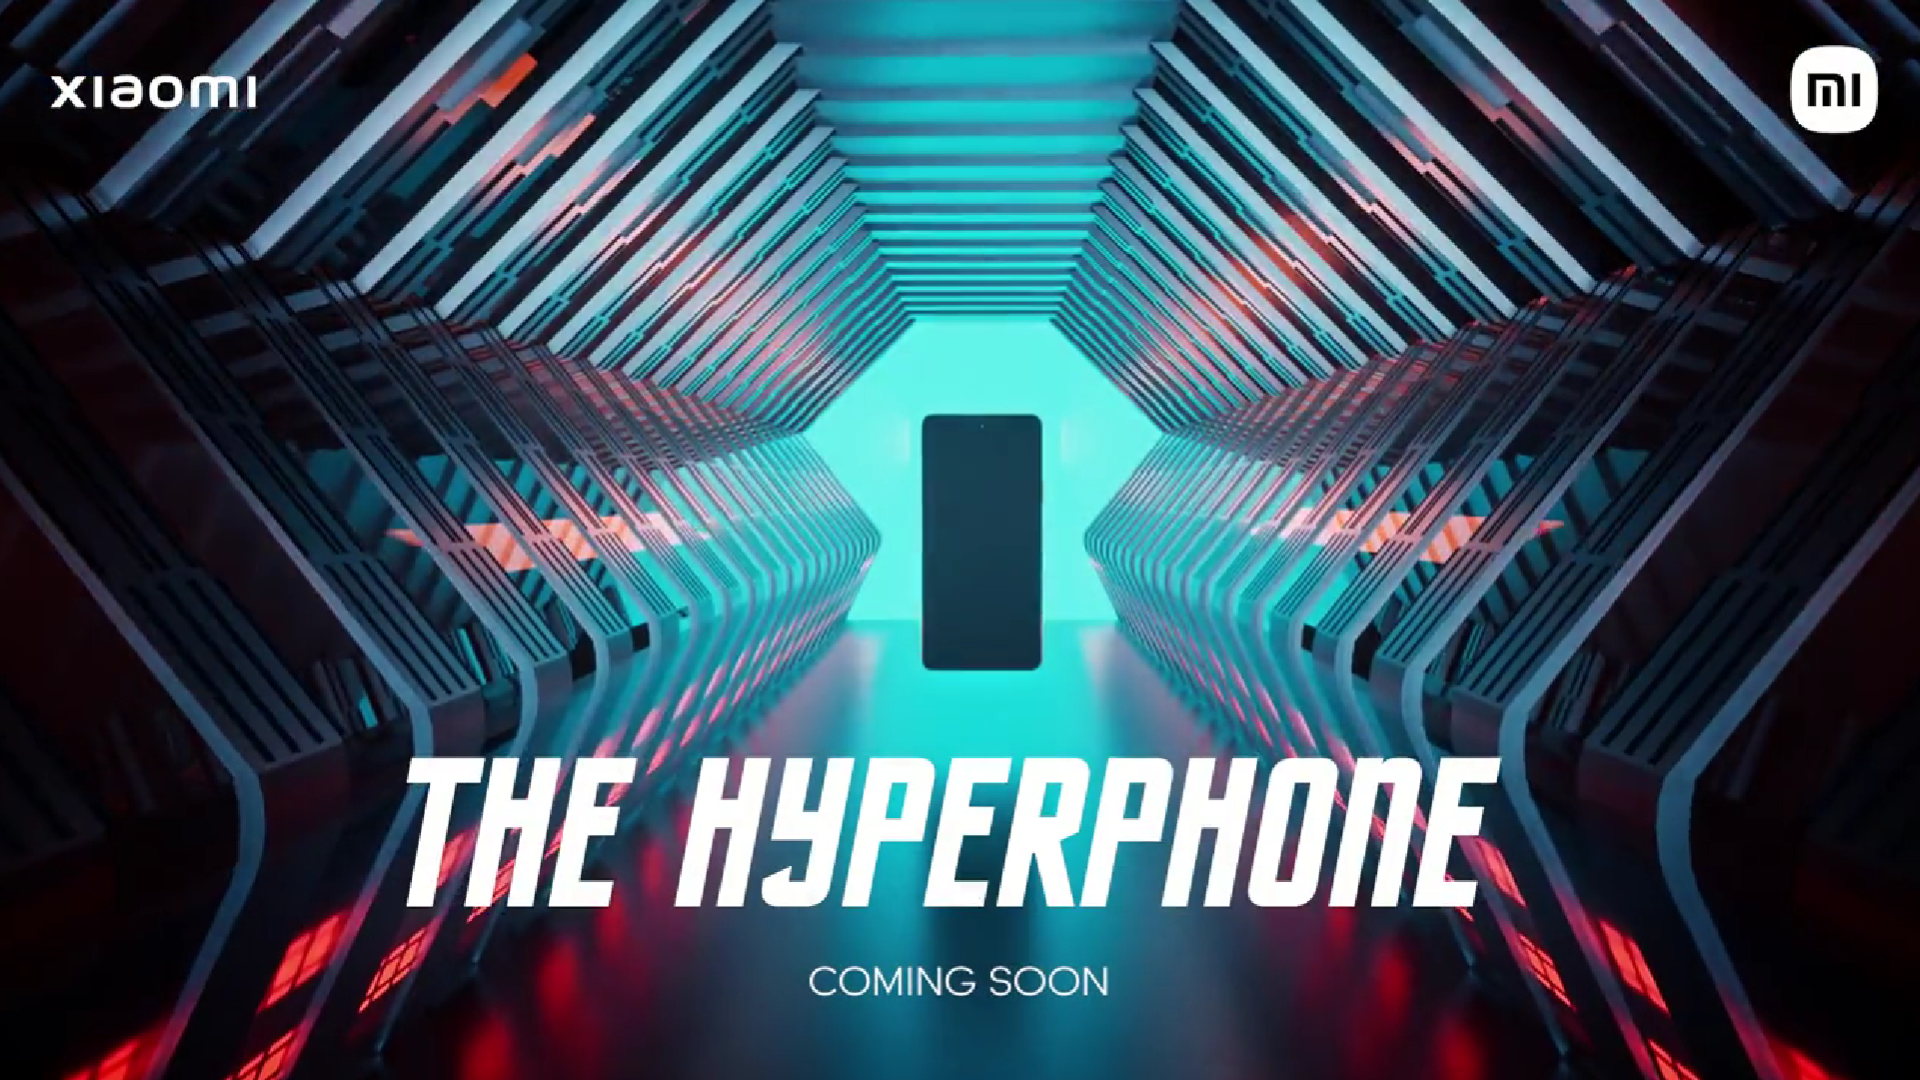 Xiaomi promises to present a revolutionary "hyperphone"